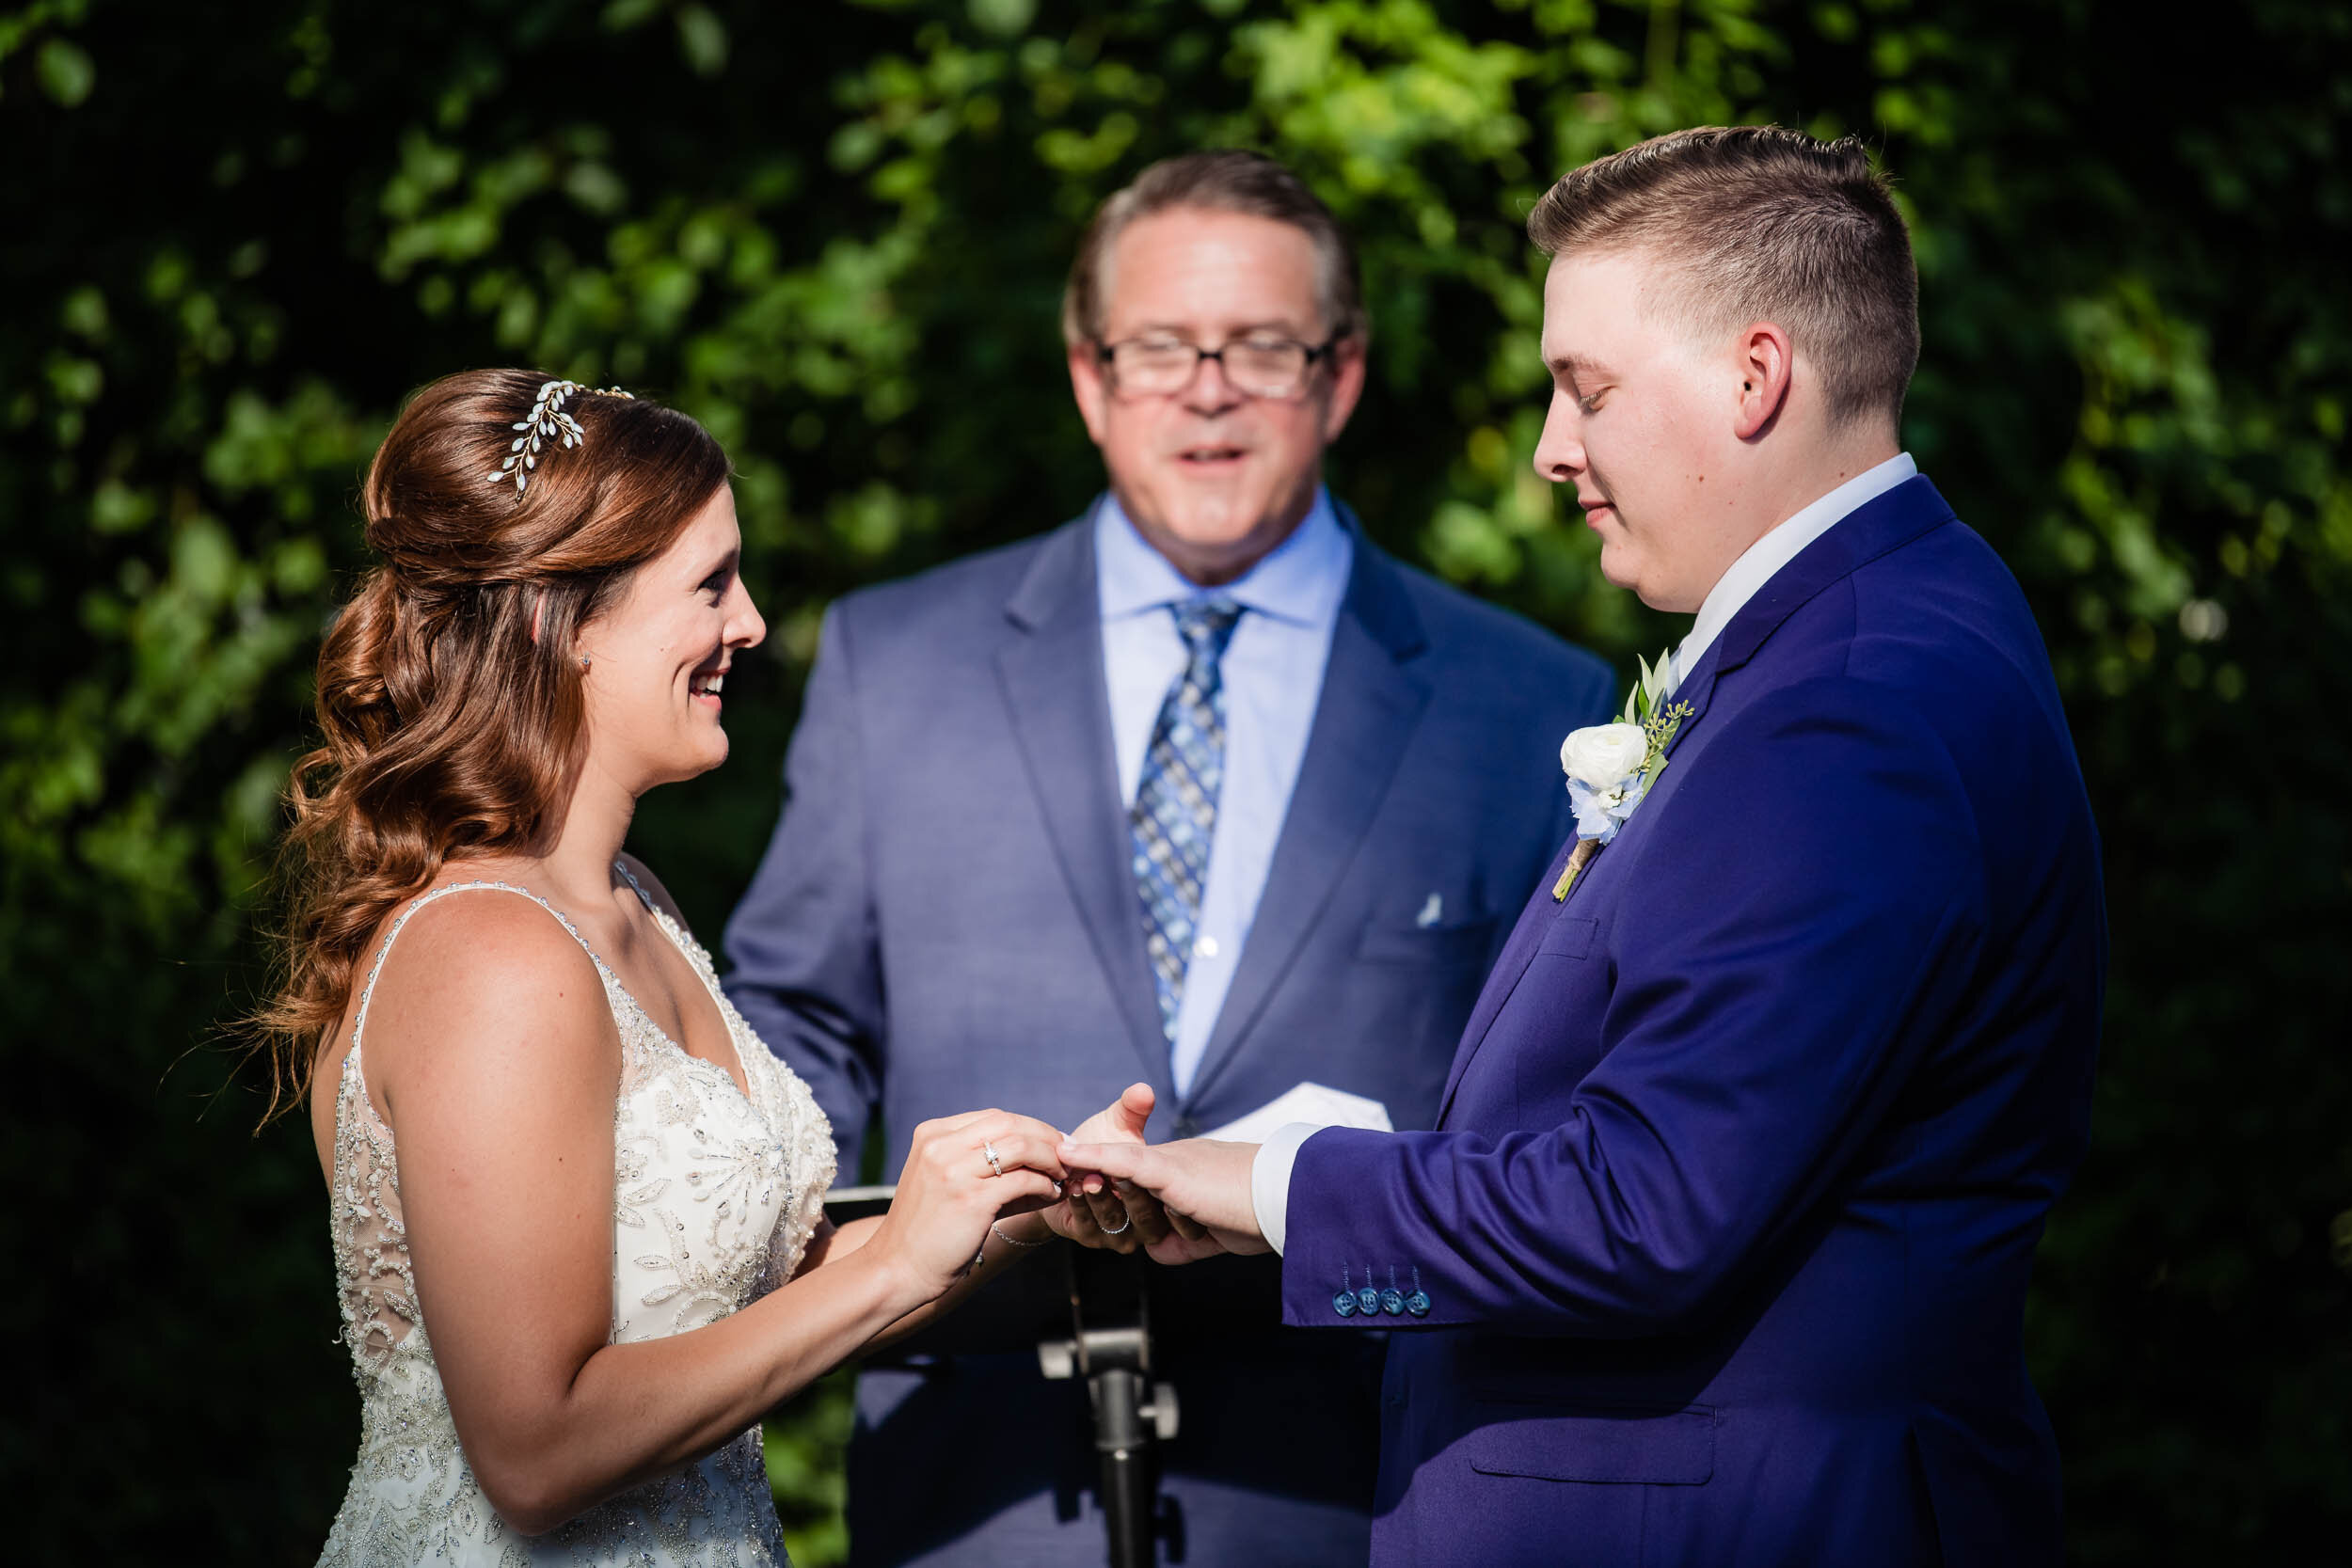 Bride and groom exchange ring during their ceremony:  Chicago backyard wedding photographed by J. Brown Photography.